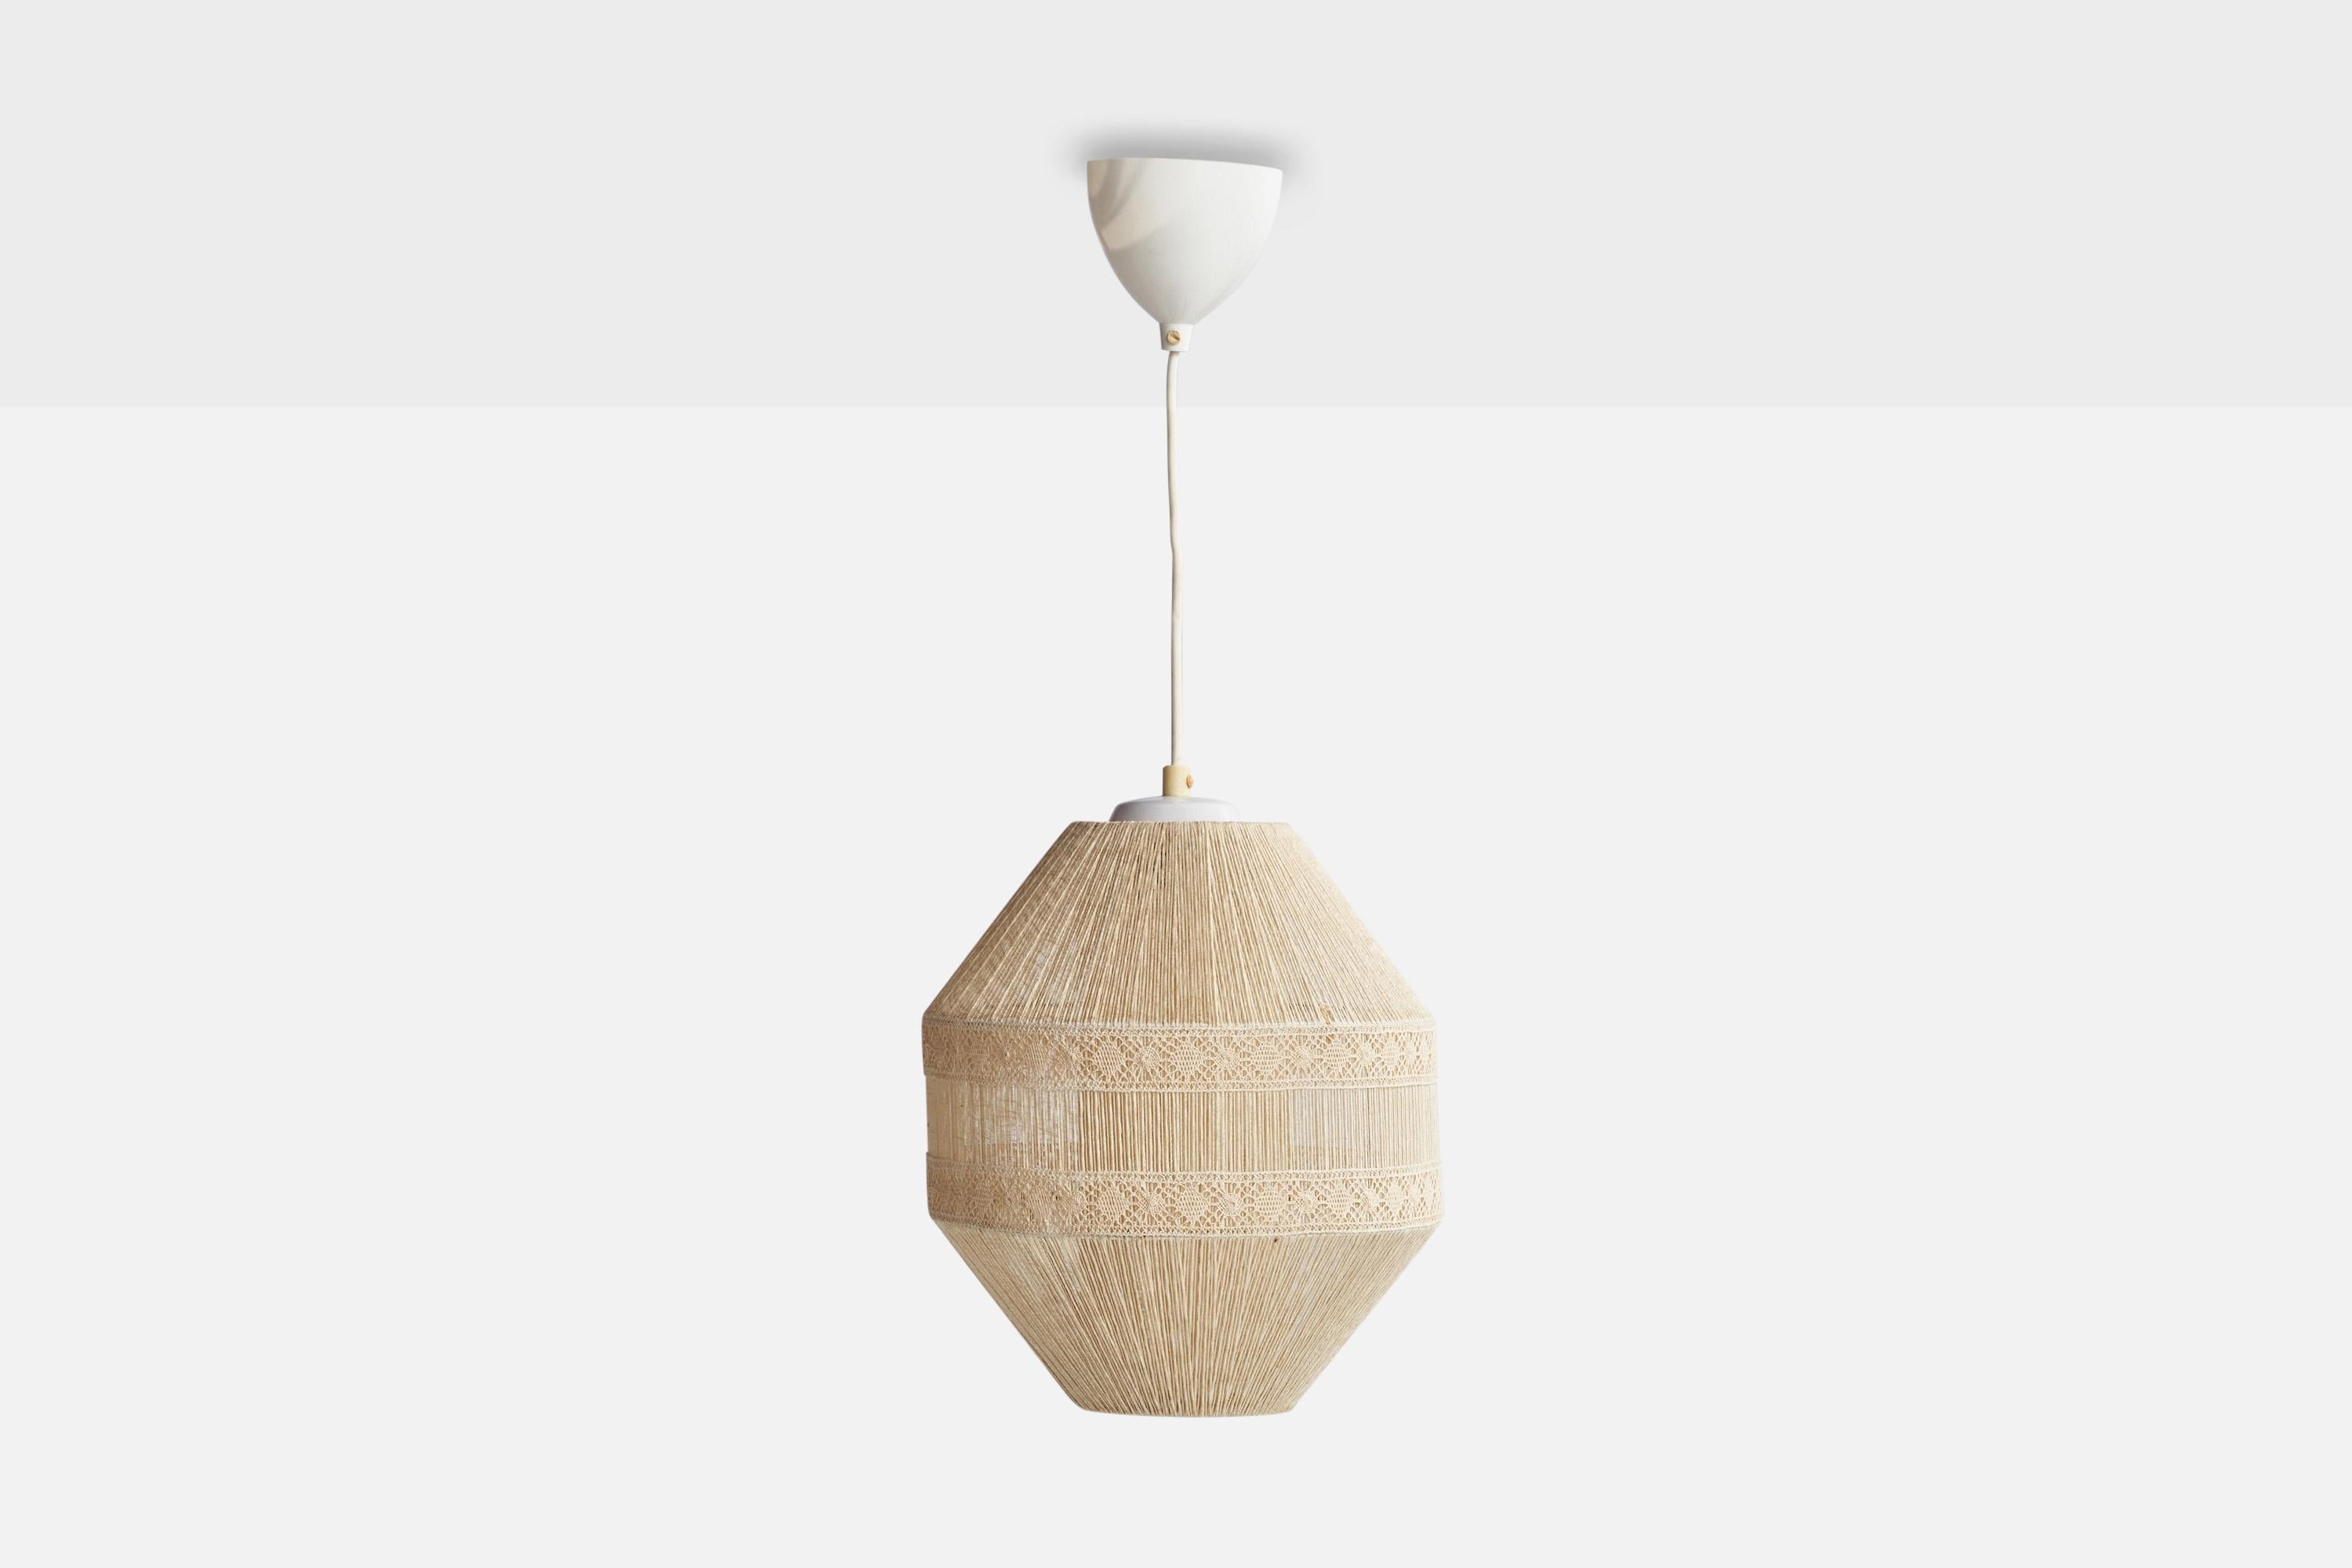 A string fabric pendant light designed and produced in Sweden, 1950s.

Dimensions of canopy (inches): 3.5” H x 3.75”Diameter
Socket takes standard E-26 bulbs. 1 socket.There is no maximum wattage stated on the fixture. All lighting will be converted